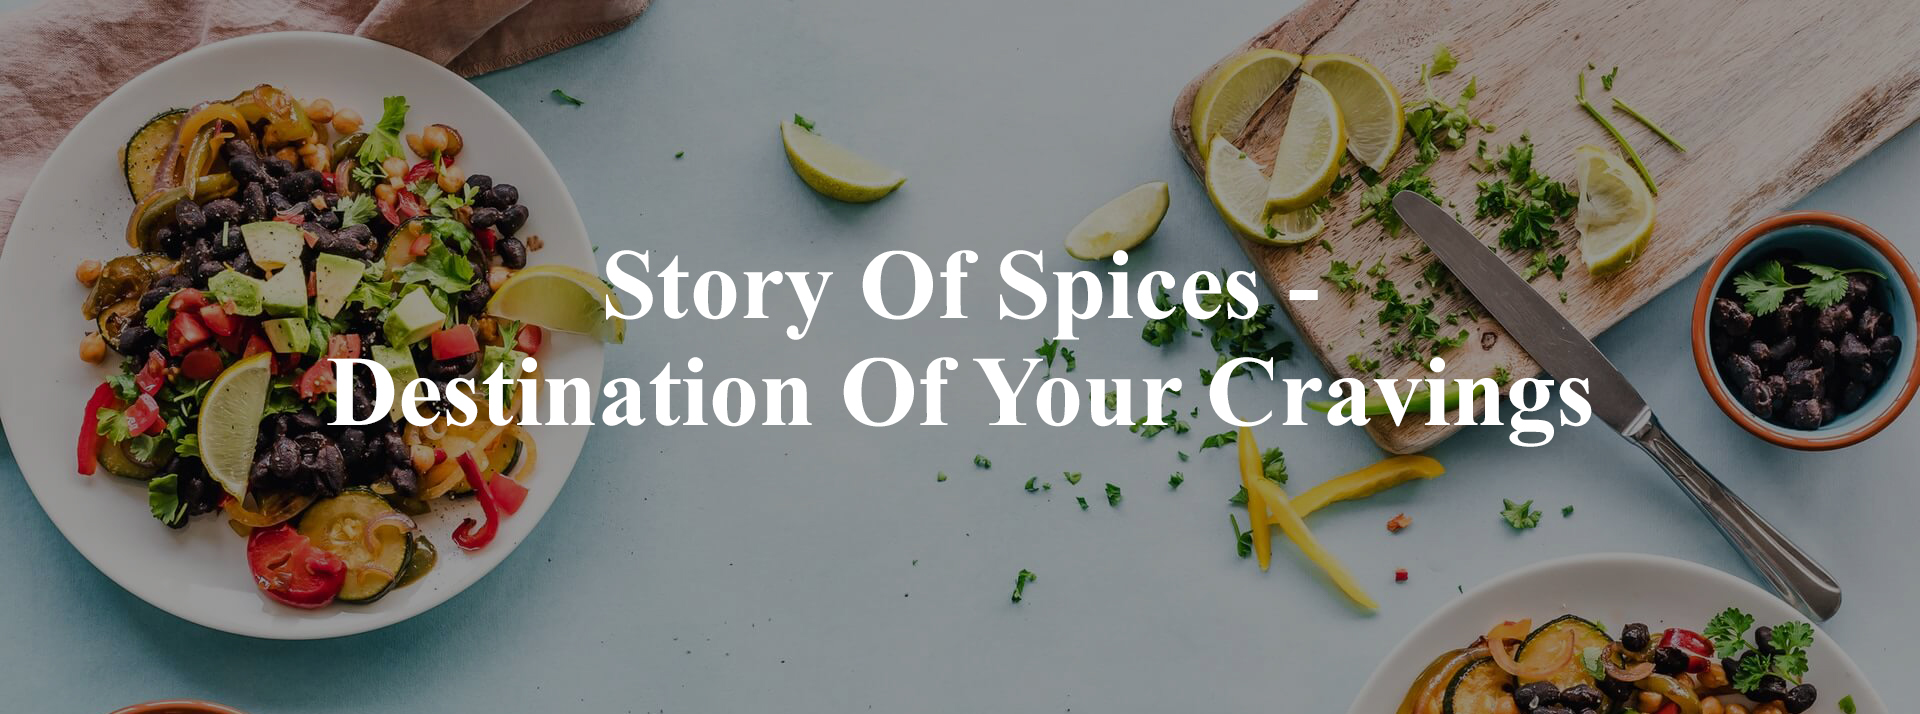 Story Of Spices Homepage Image